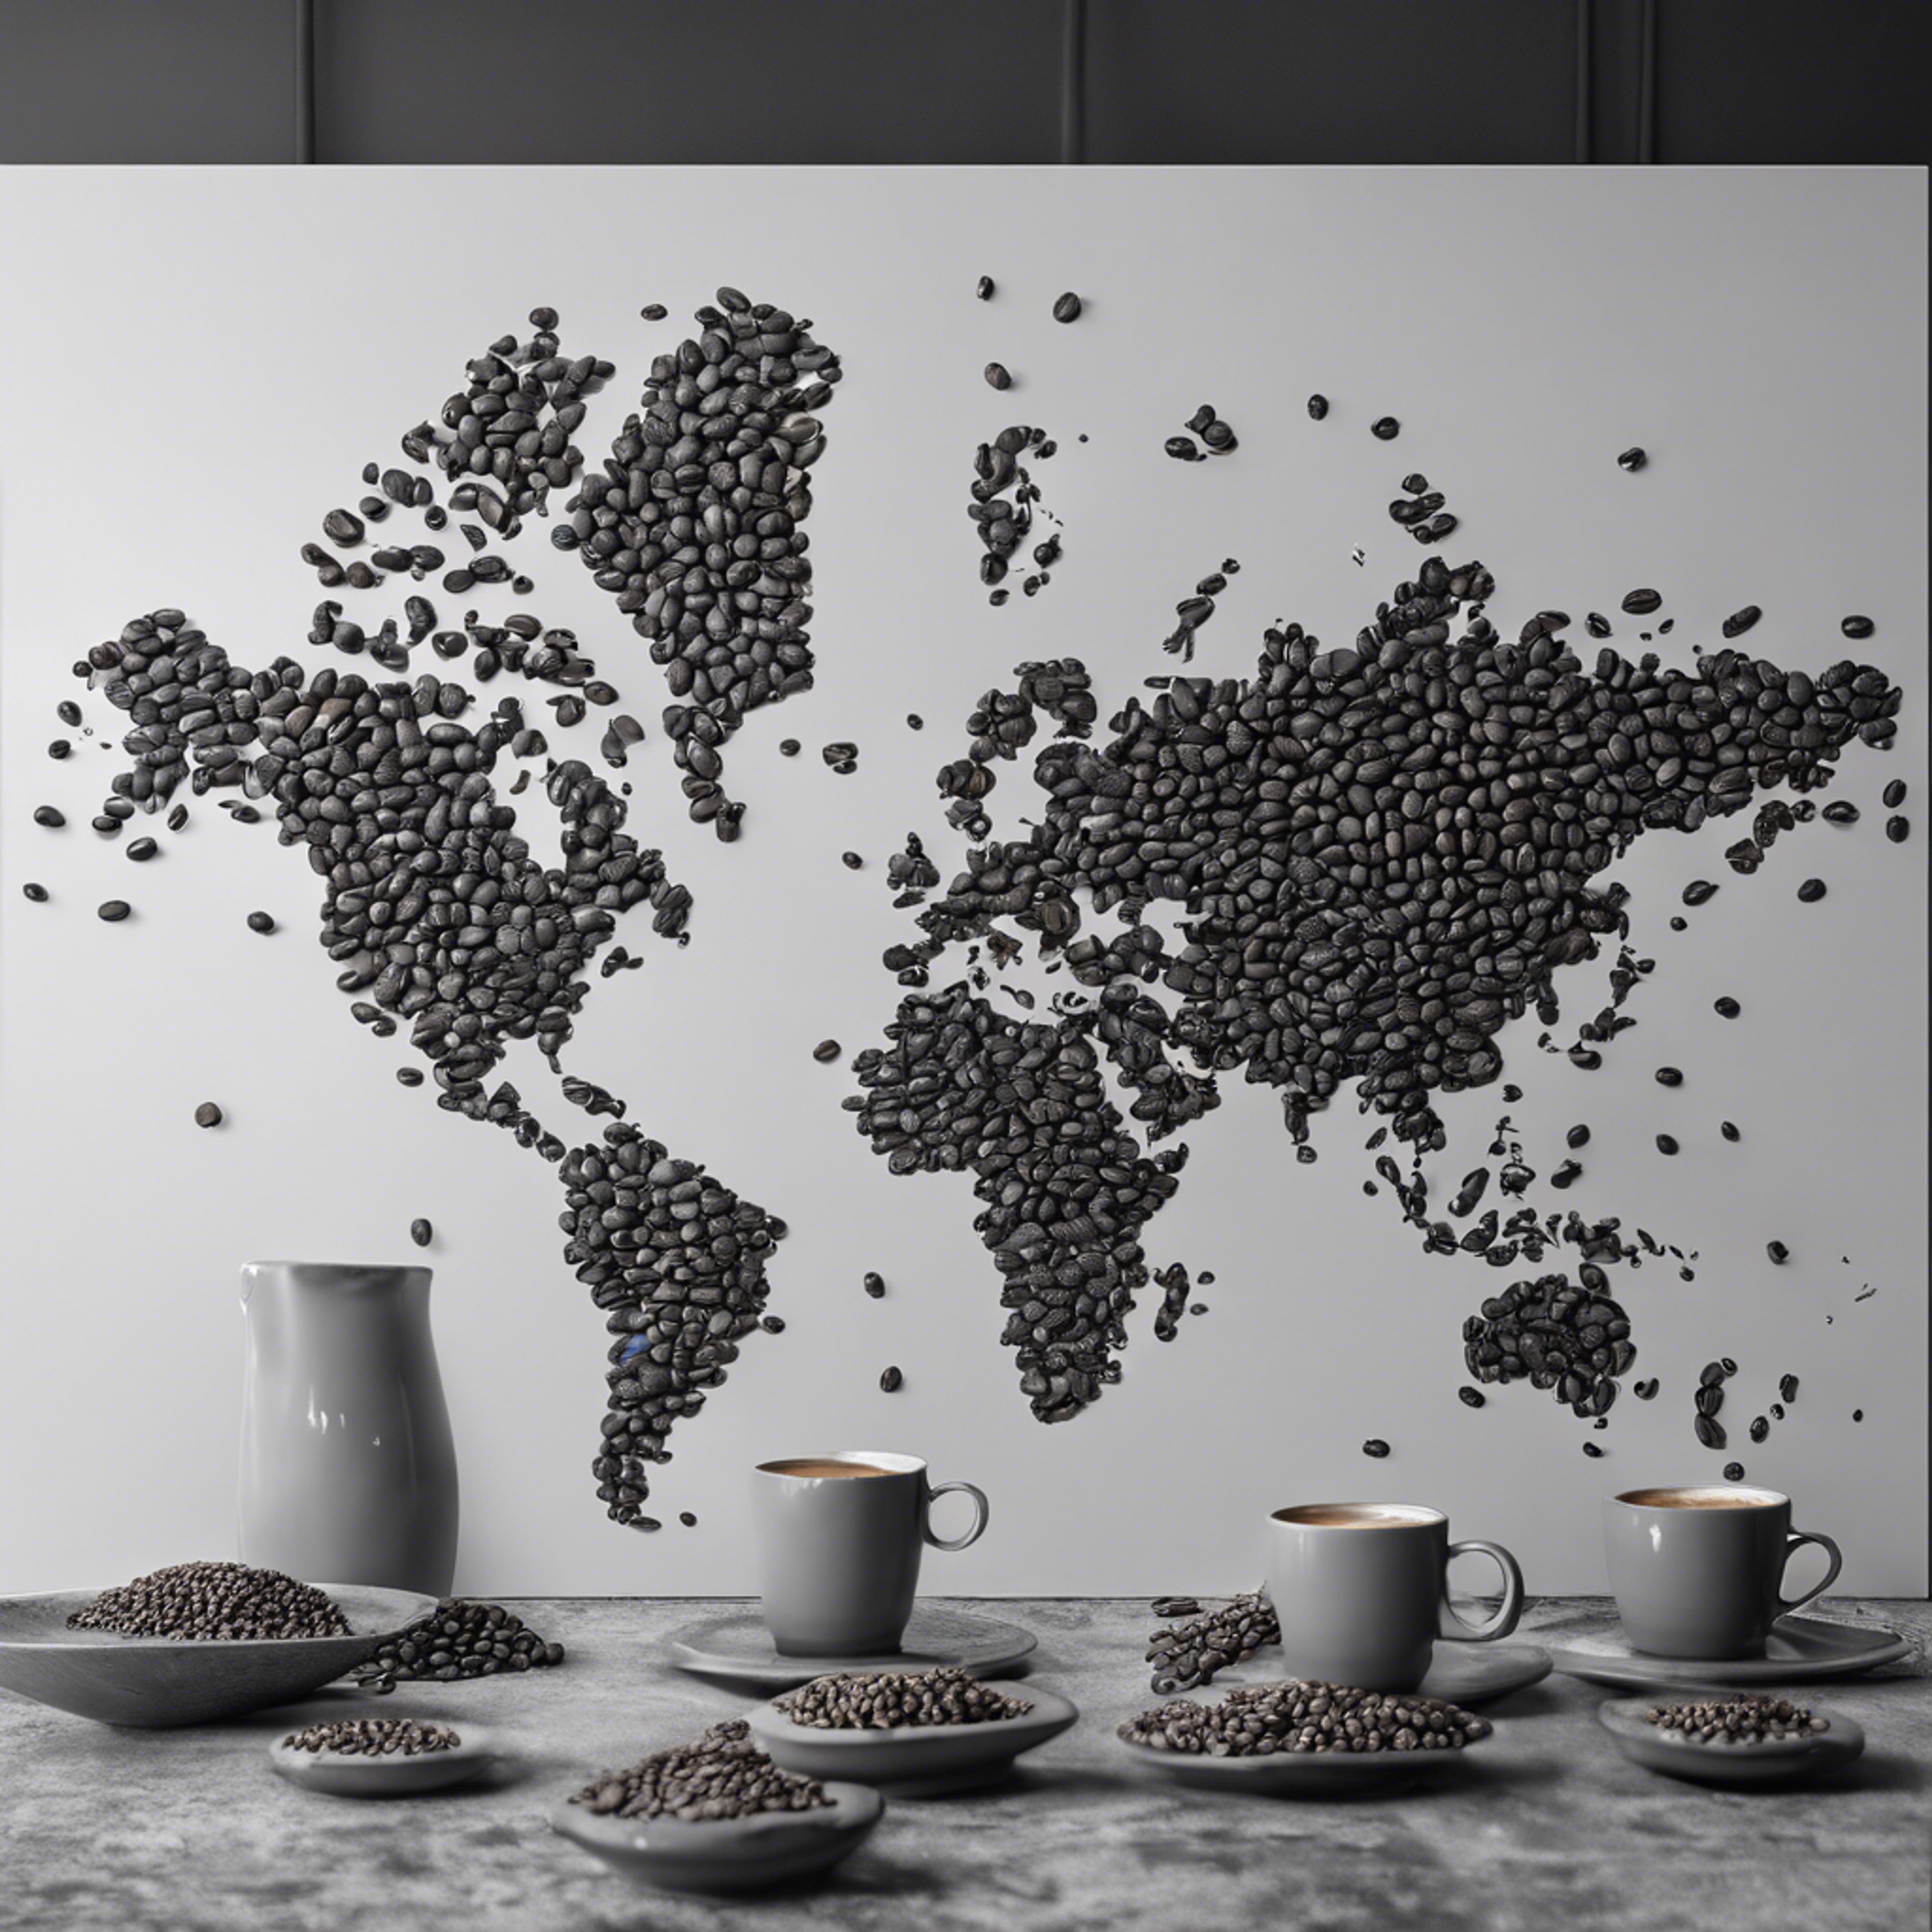 A grayscale world map laid out with coffee beans on a cafe table. Papel de parede[a42175c9d73a43528667]